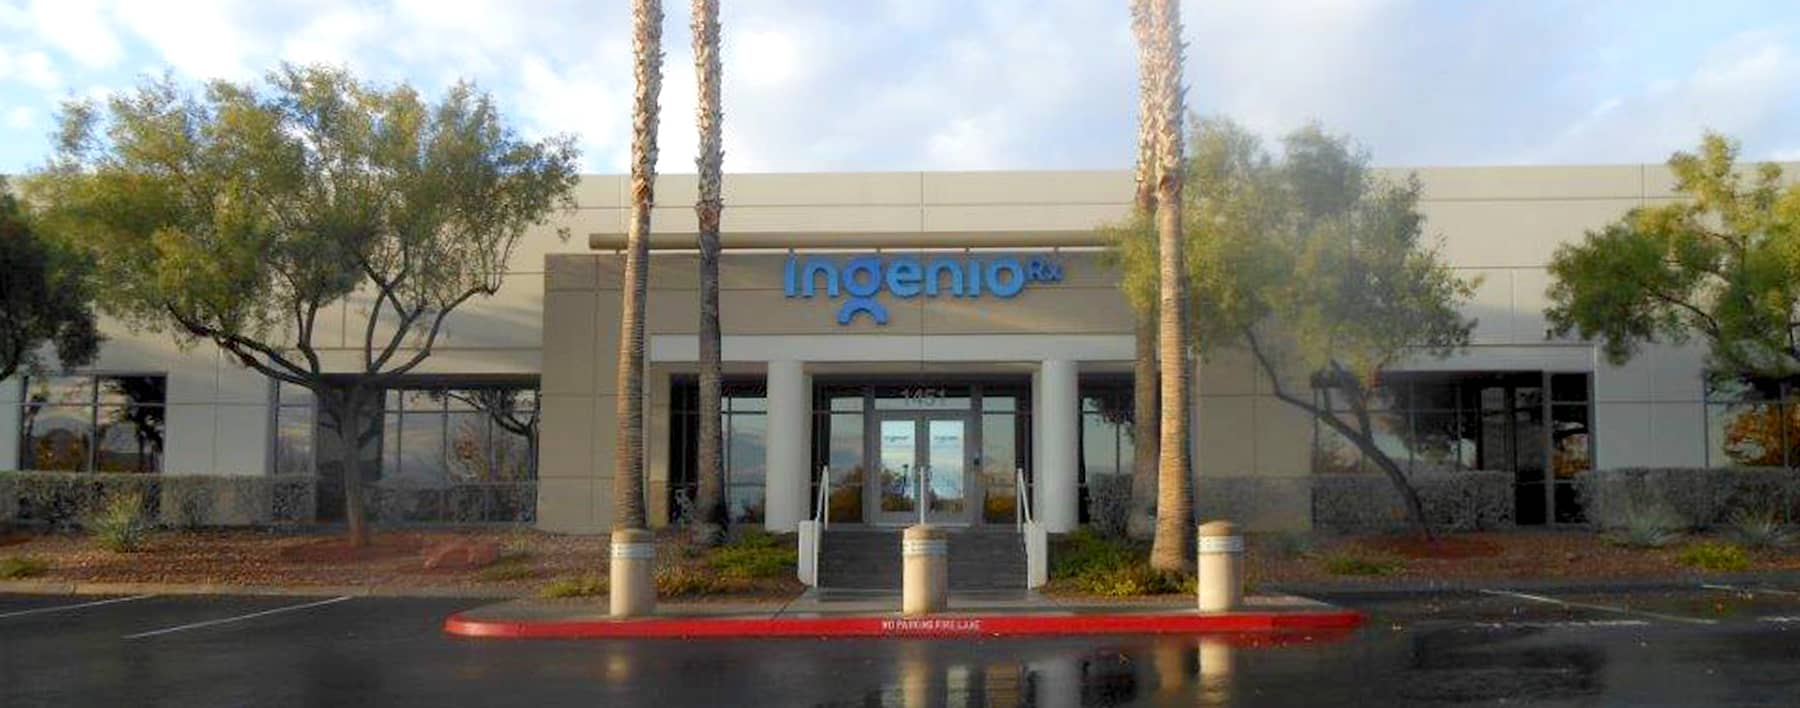 CVS Health and IngenioRx Meeting and Call Center in Las Vegas, Nevada | GLR, Inc.